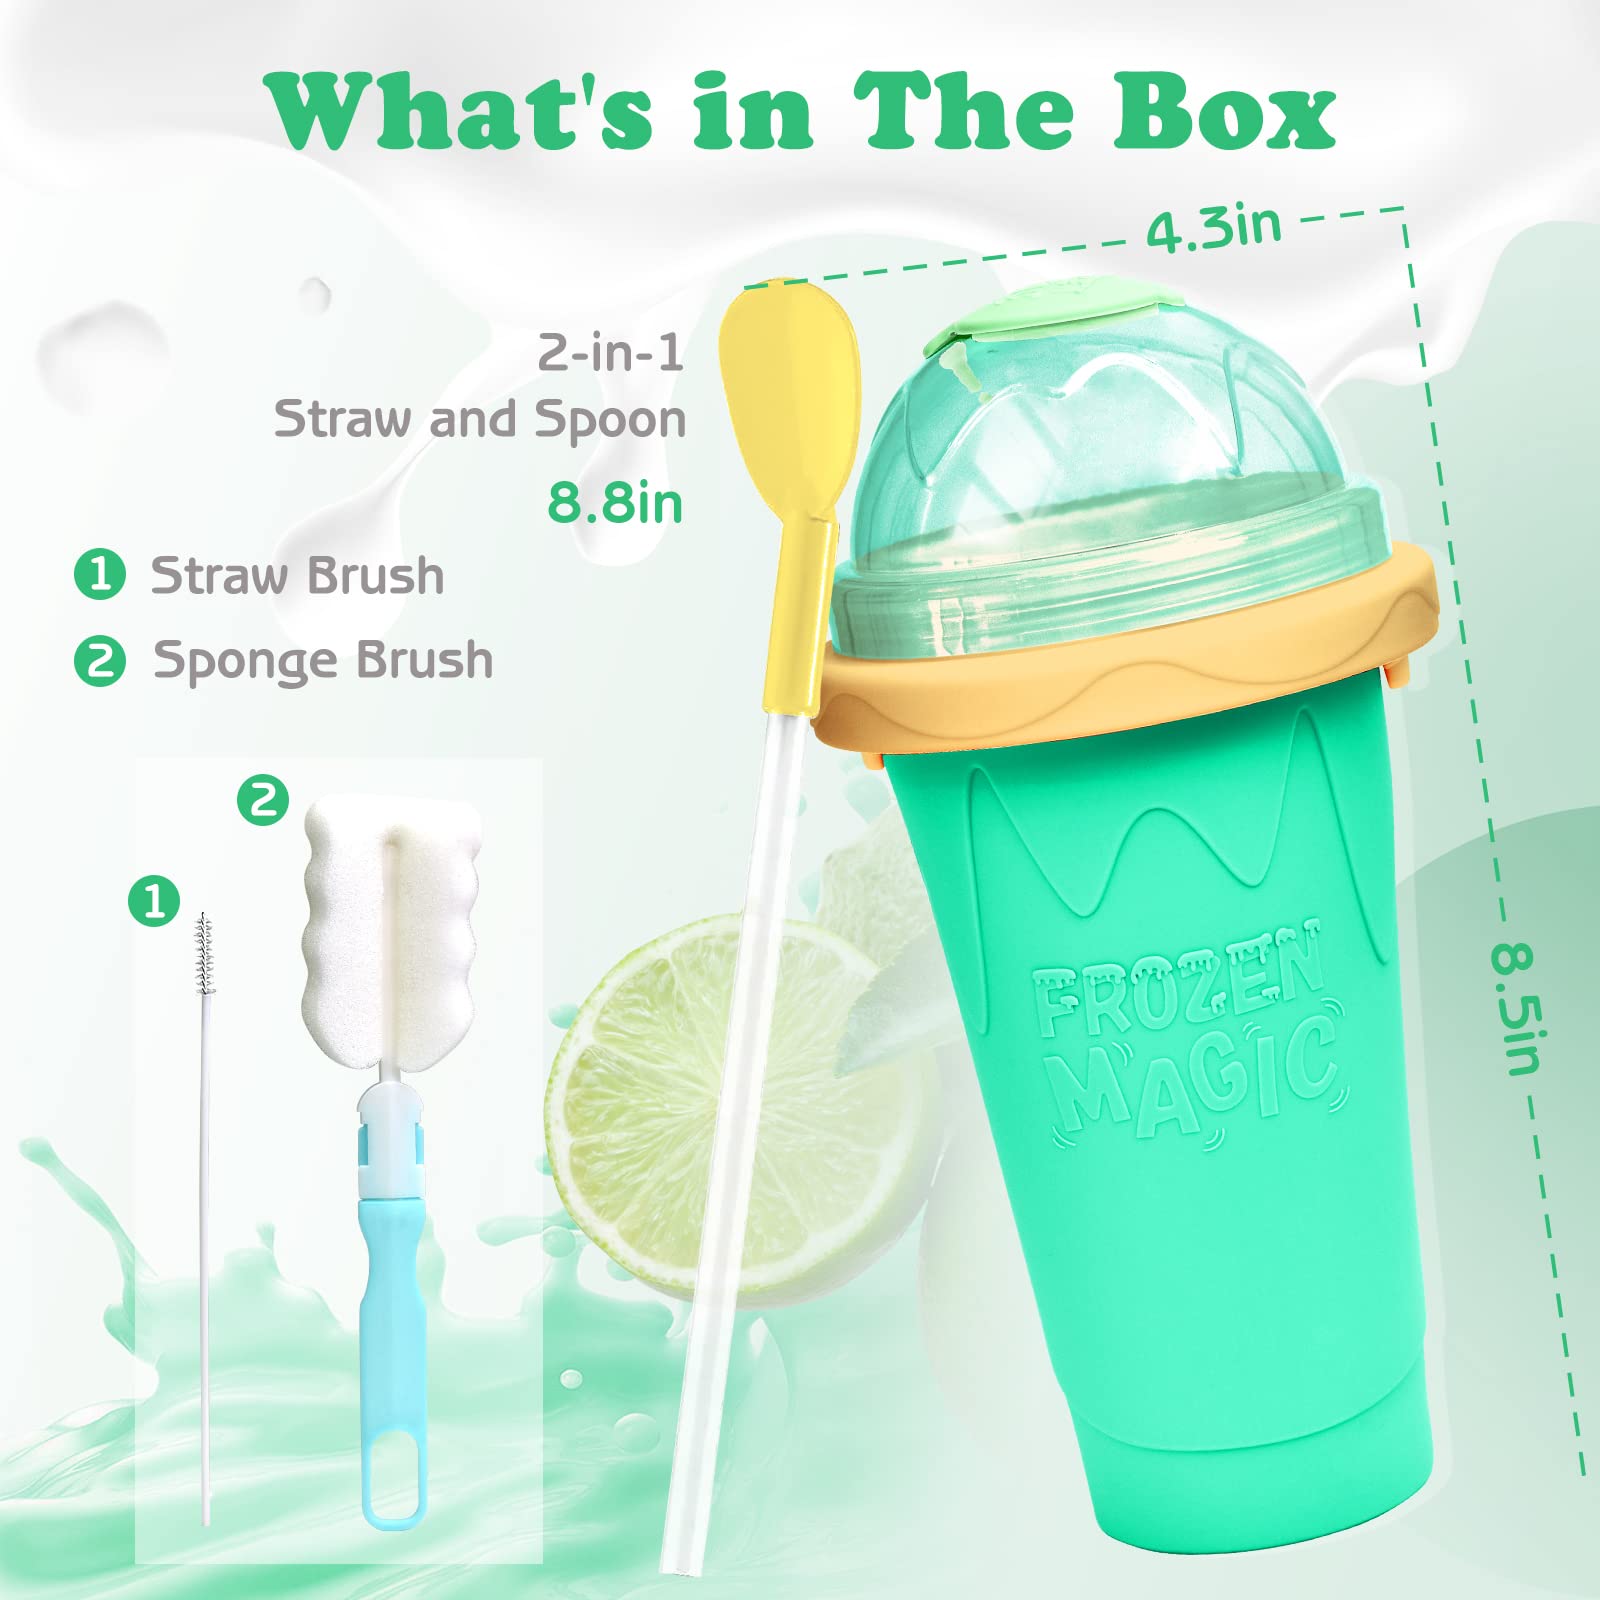 Buy KTEBO Frozen Magic Slushy Cup, Smoothie Cups with Lids and Straws, Slushie  Maker Cup is Cool Stuff Things, Fasting Cooling Make Milkshake smoothie  Freeze Beer - TIKT0K Trend Items Cool Gadgets-Green